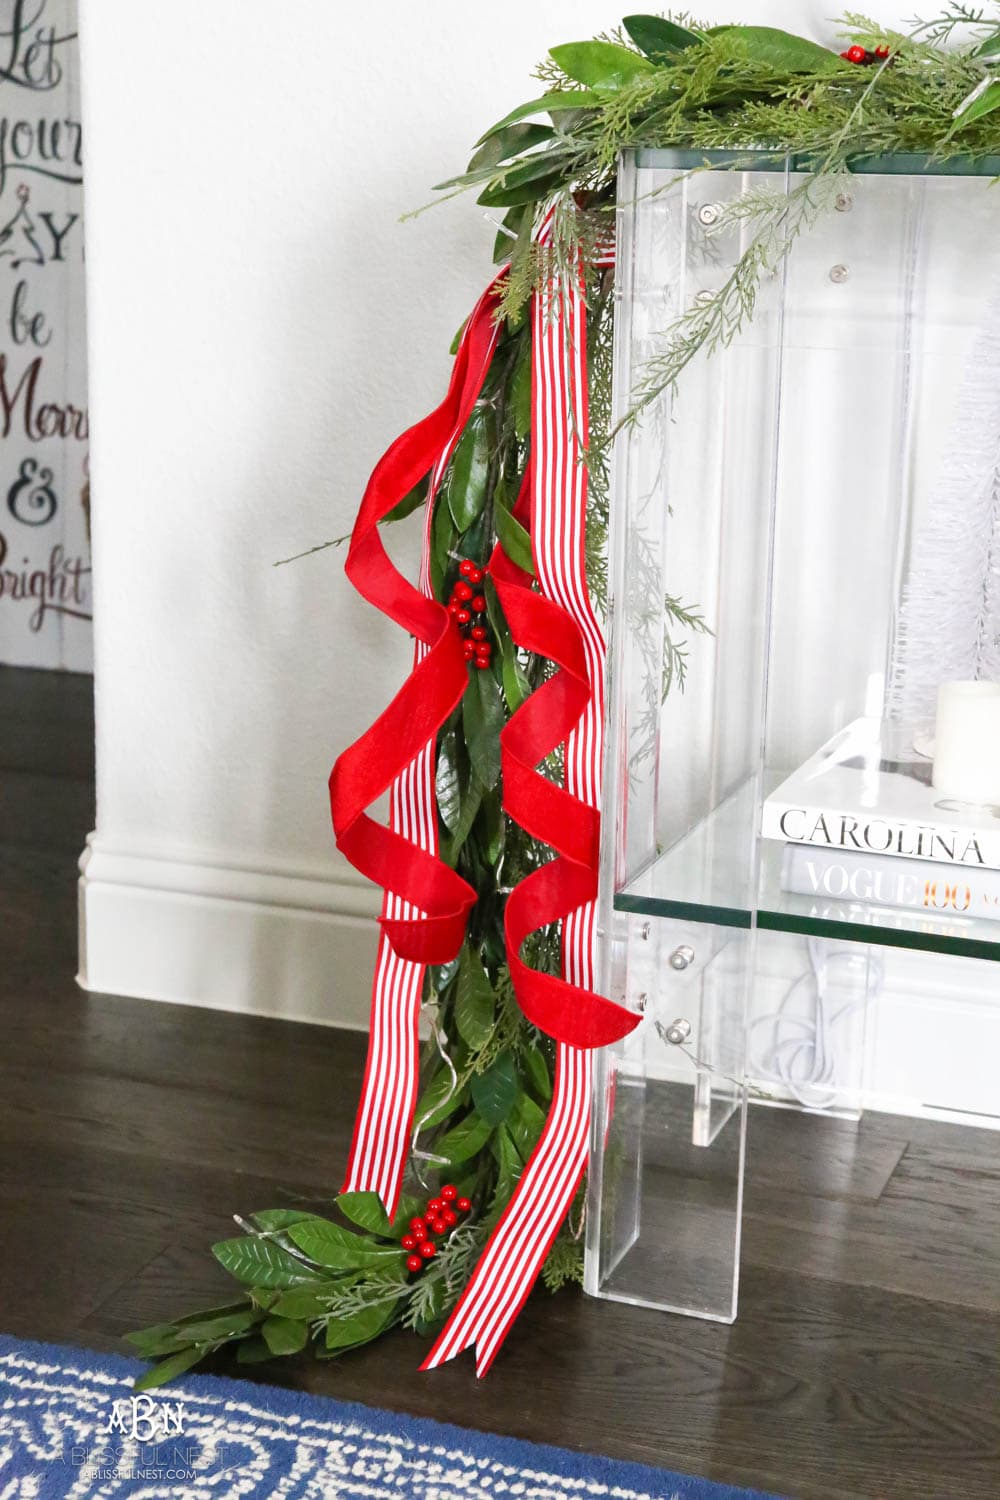 Layered garland makes a full look and adding in festive red and white ribbon. Love these easy and simple classic Christmas touches in this entryway. #christmasentryway #christmasentry #christmasentrydecor #christmasentrywayideas #christmashometour